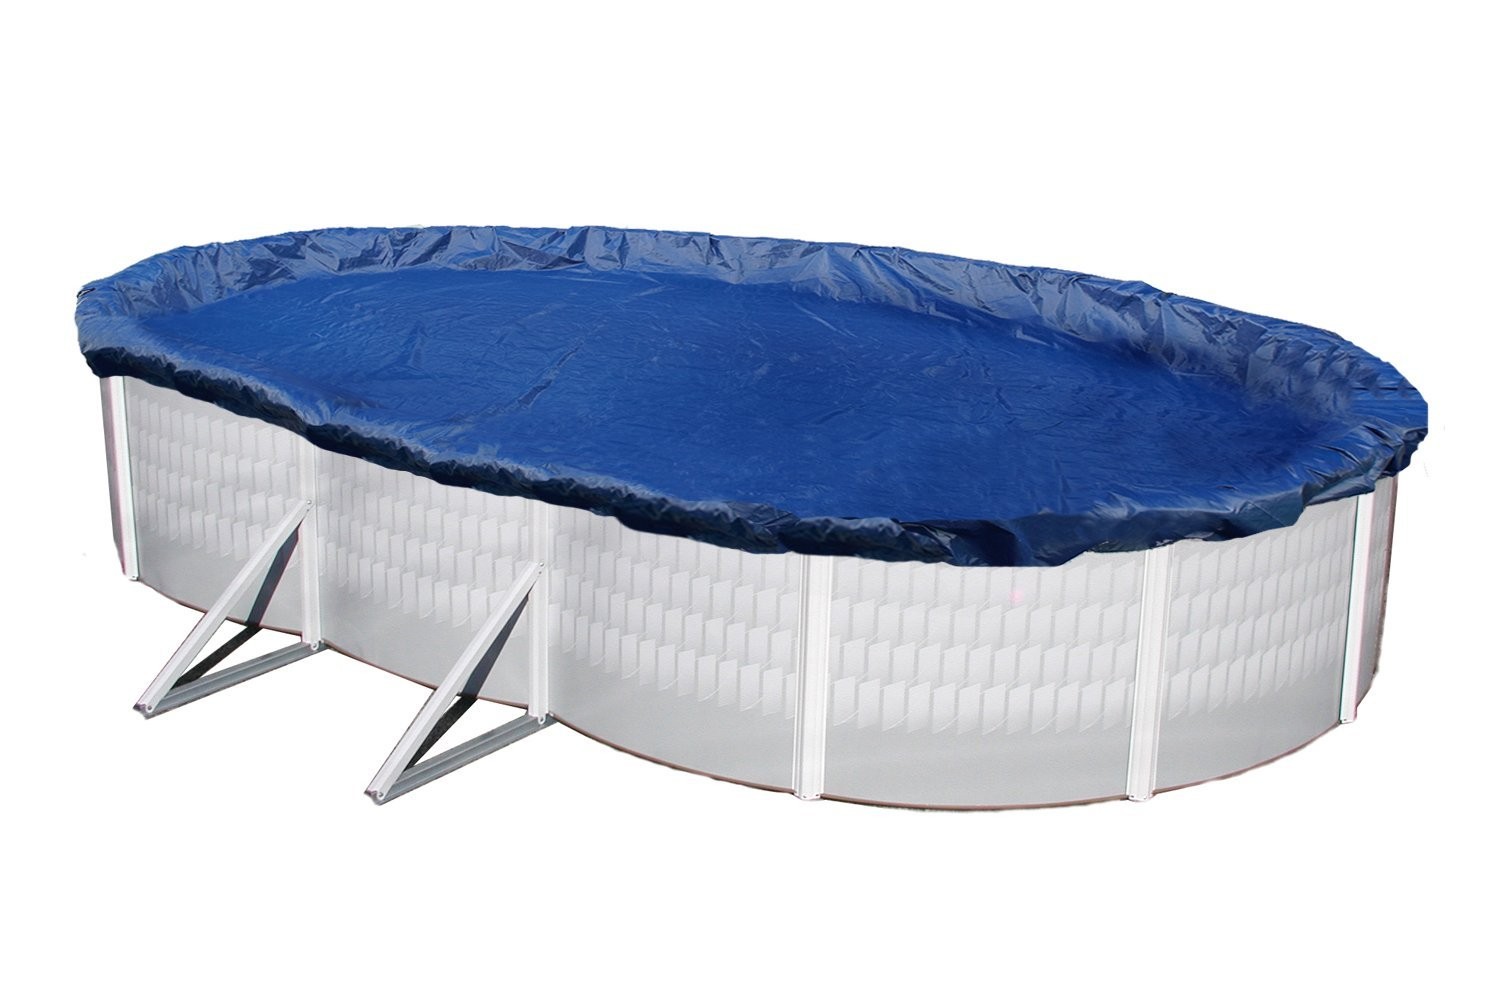 Winter Pool Cover Above Ground 15X30 Ft Oval Arctic Armor 15 Yr Warranty